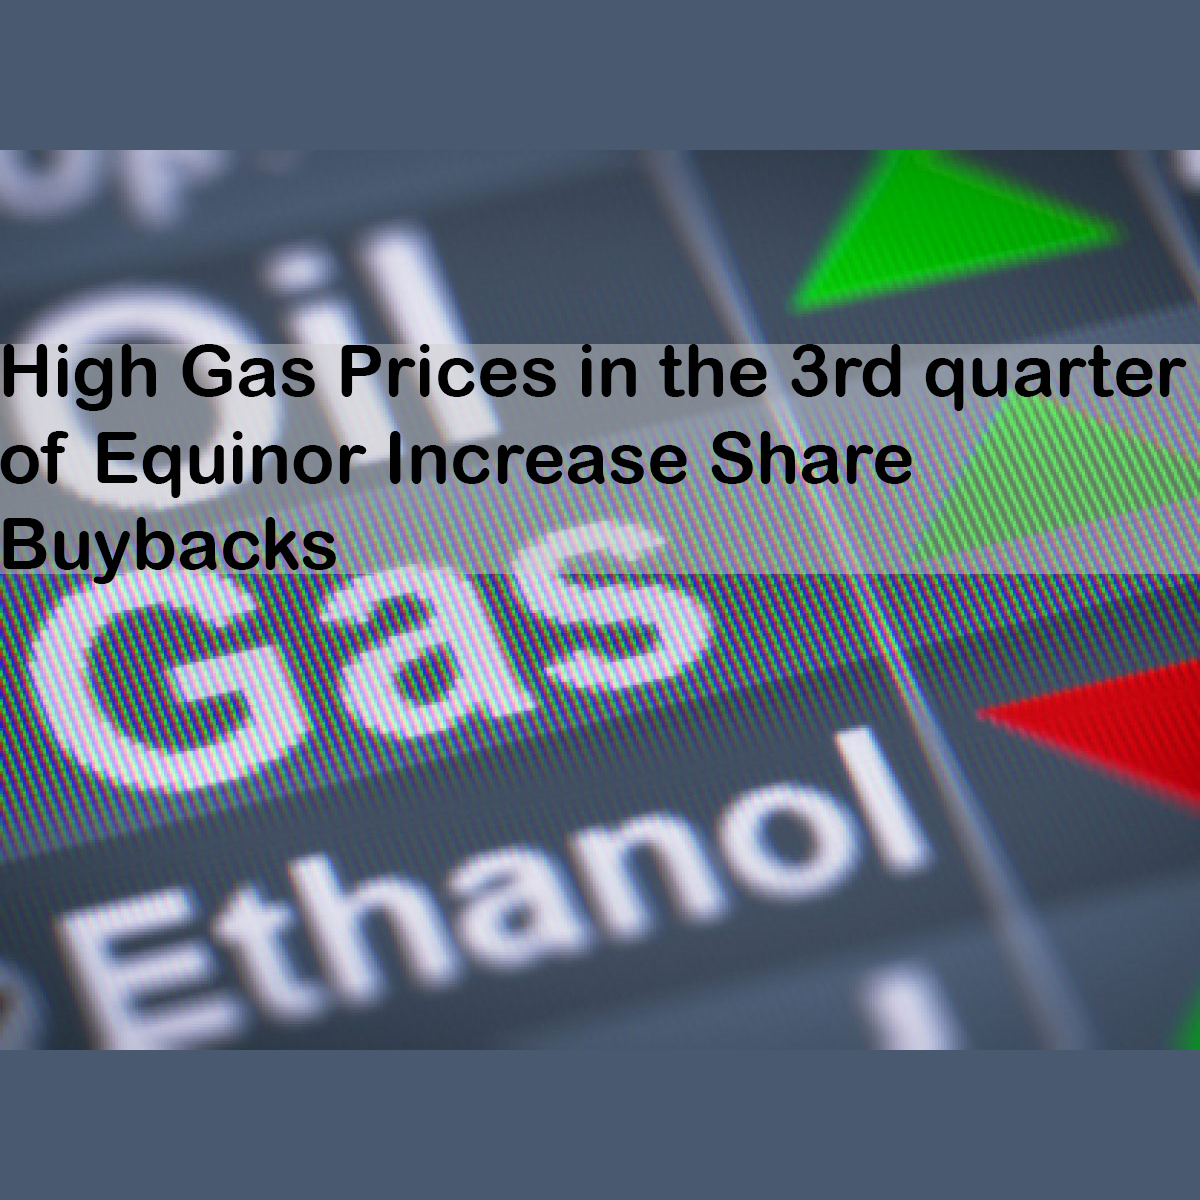 High Gas Prices in the 3rd quarter of Equinor Increase Share Buybacks